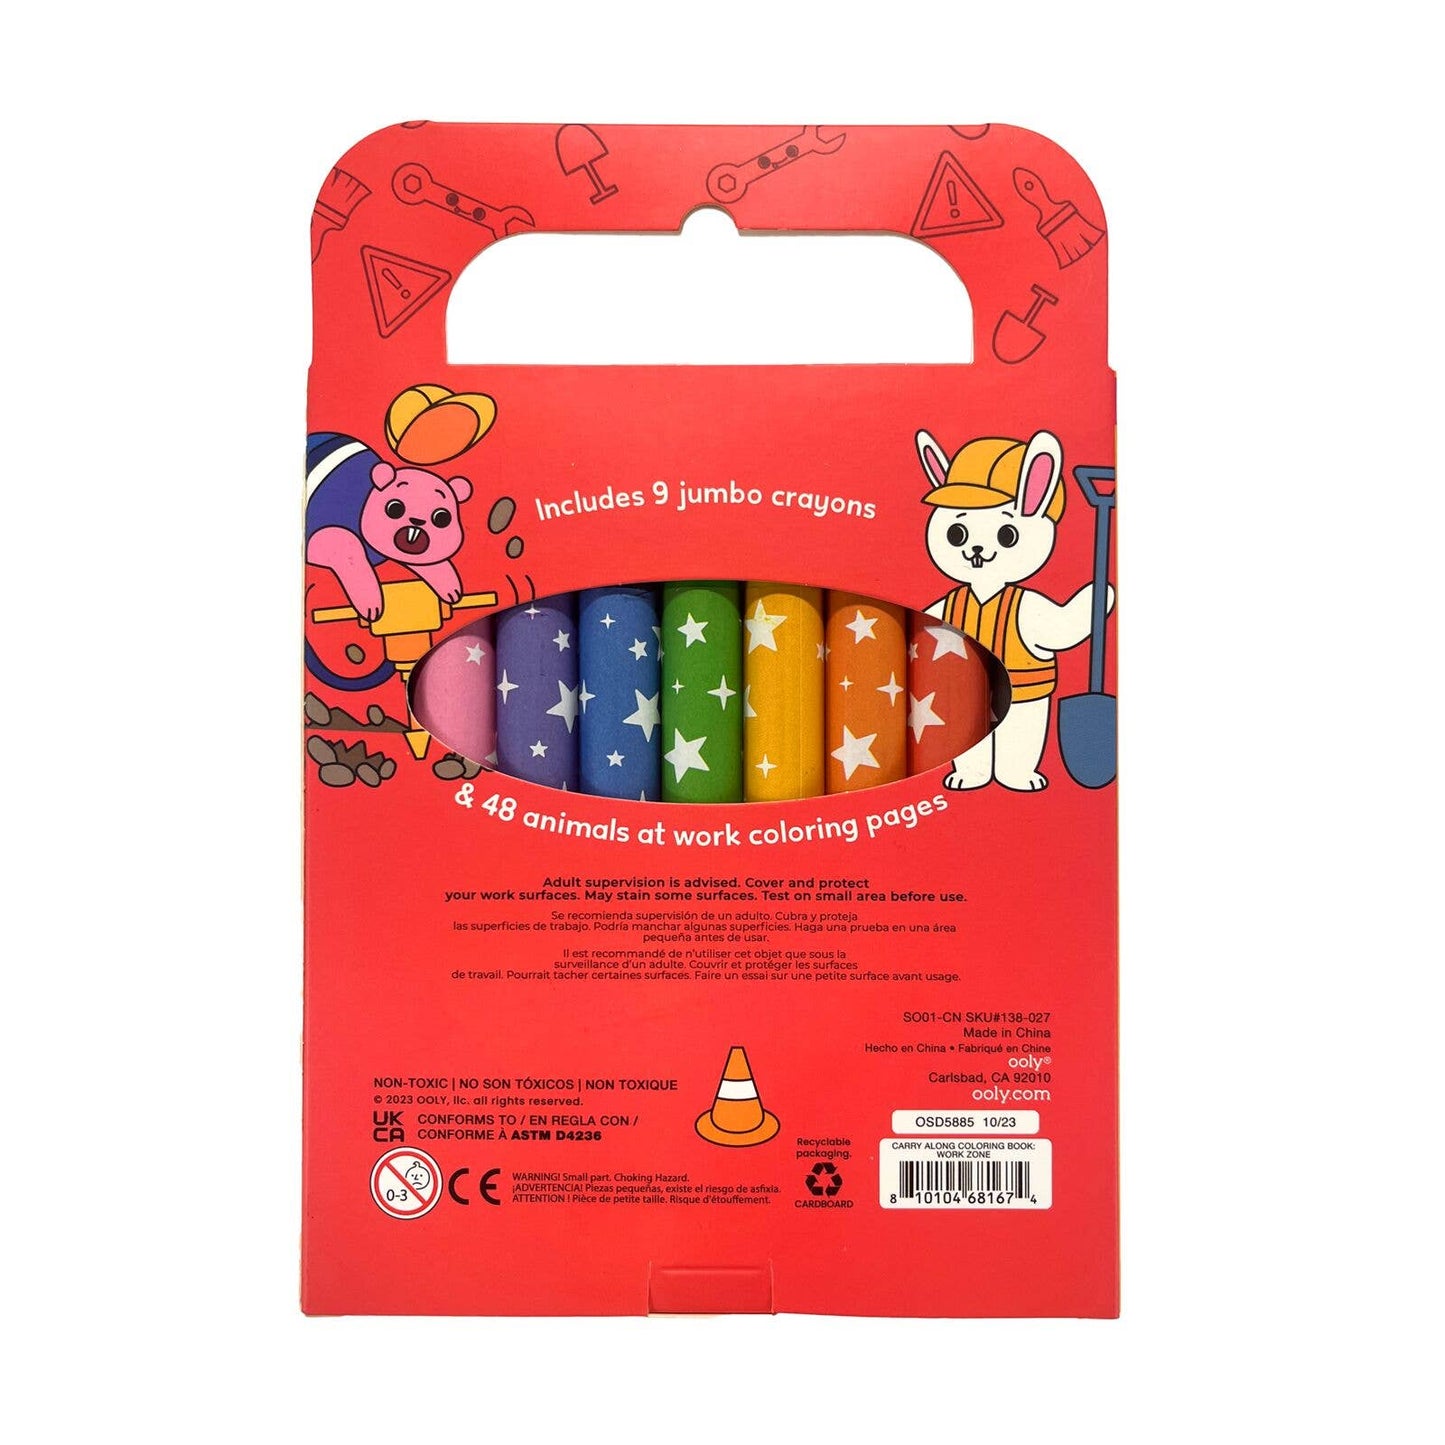 OOLY - Carry Along Crayons & Coloring Book Kit - Work Zone